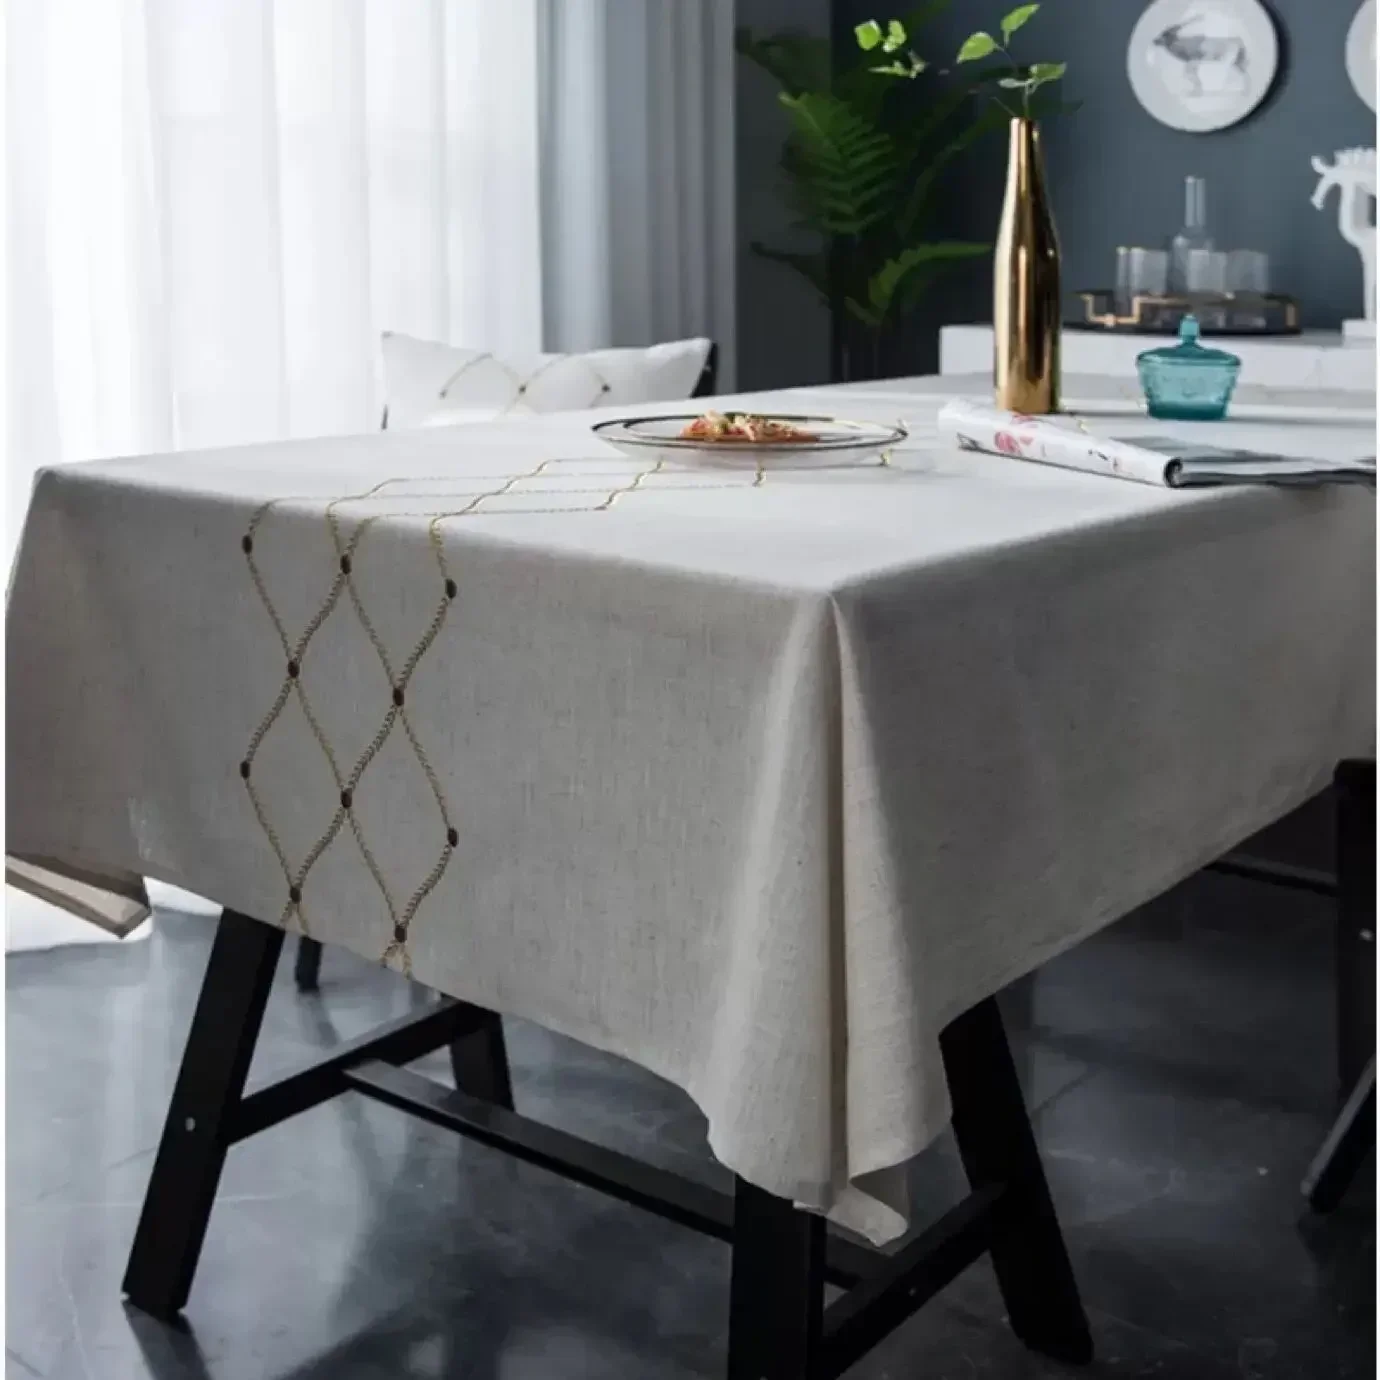 

Nordic tablecloth rectangular kitchen embroidered dining table cover party tablecloth wedding fireplace countertop decoration